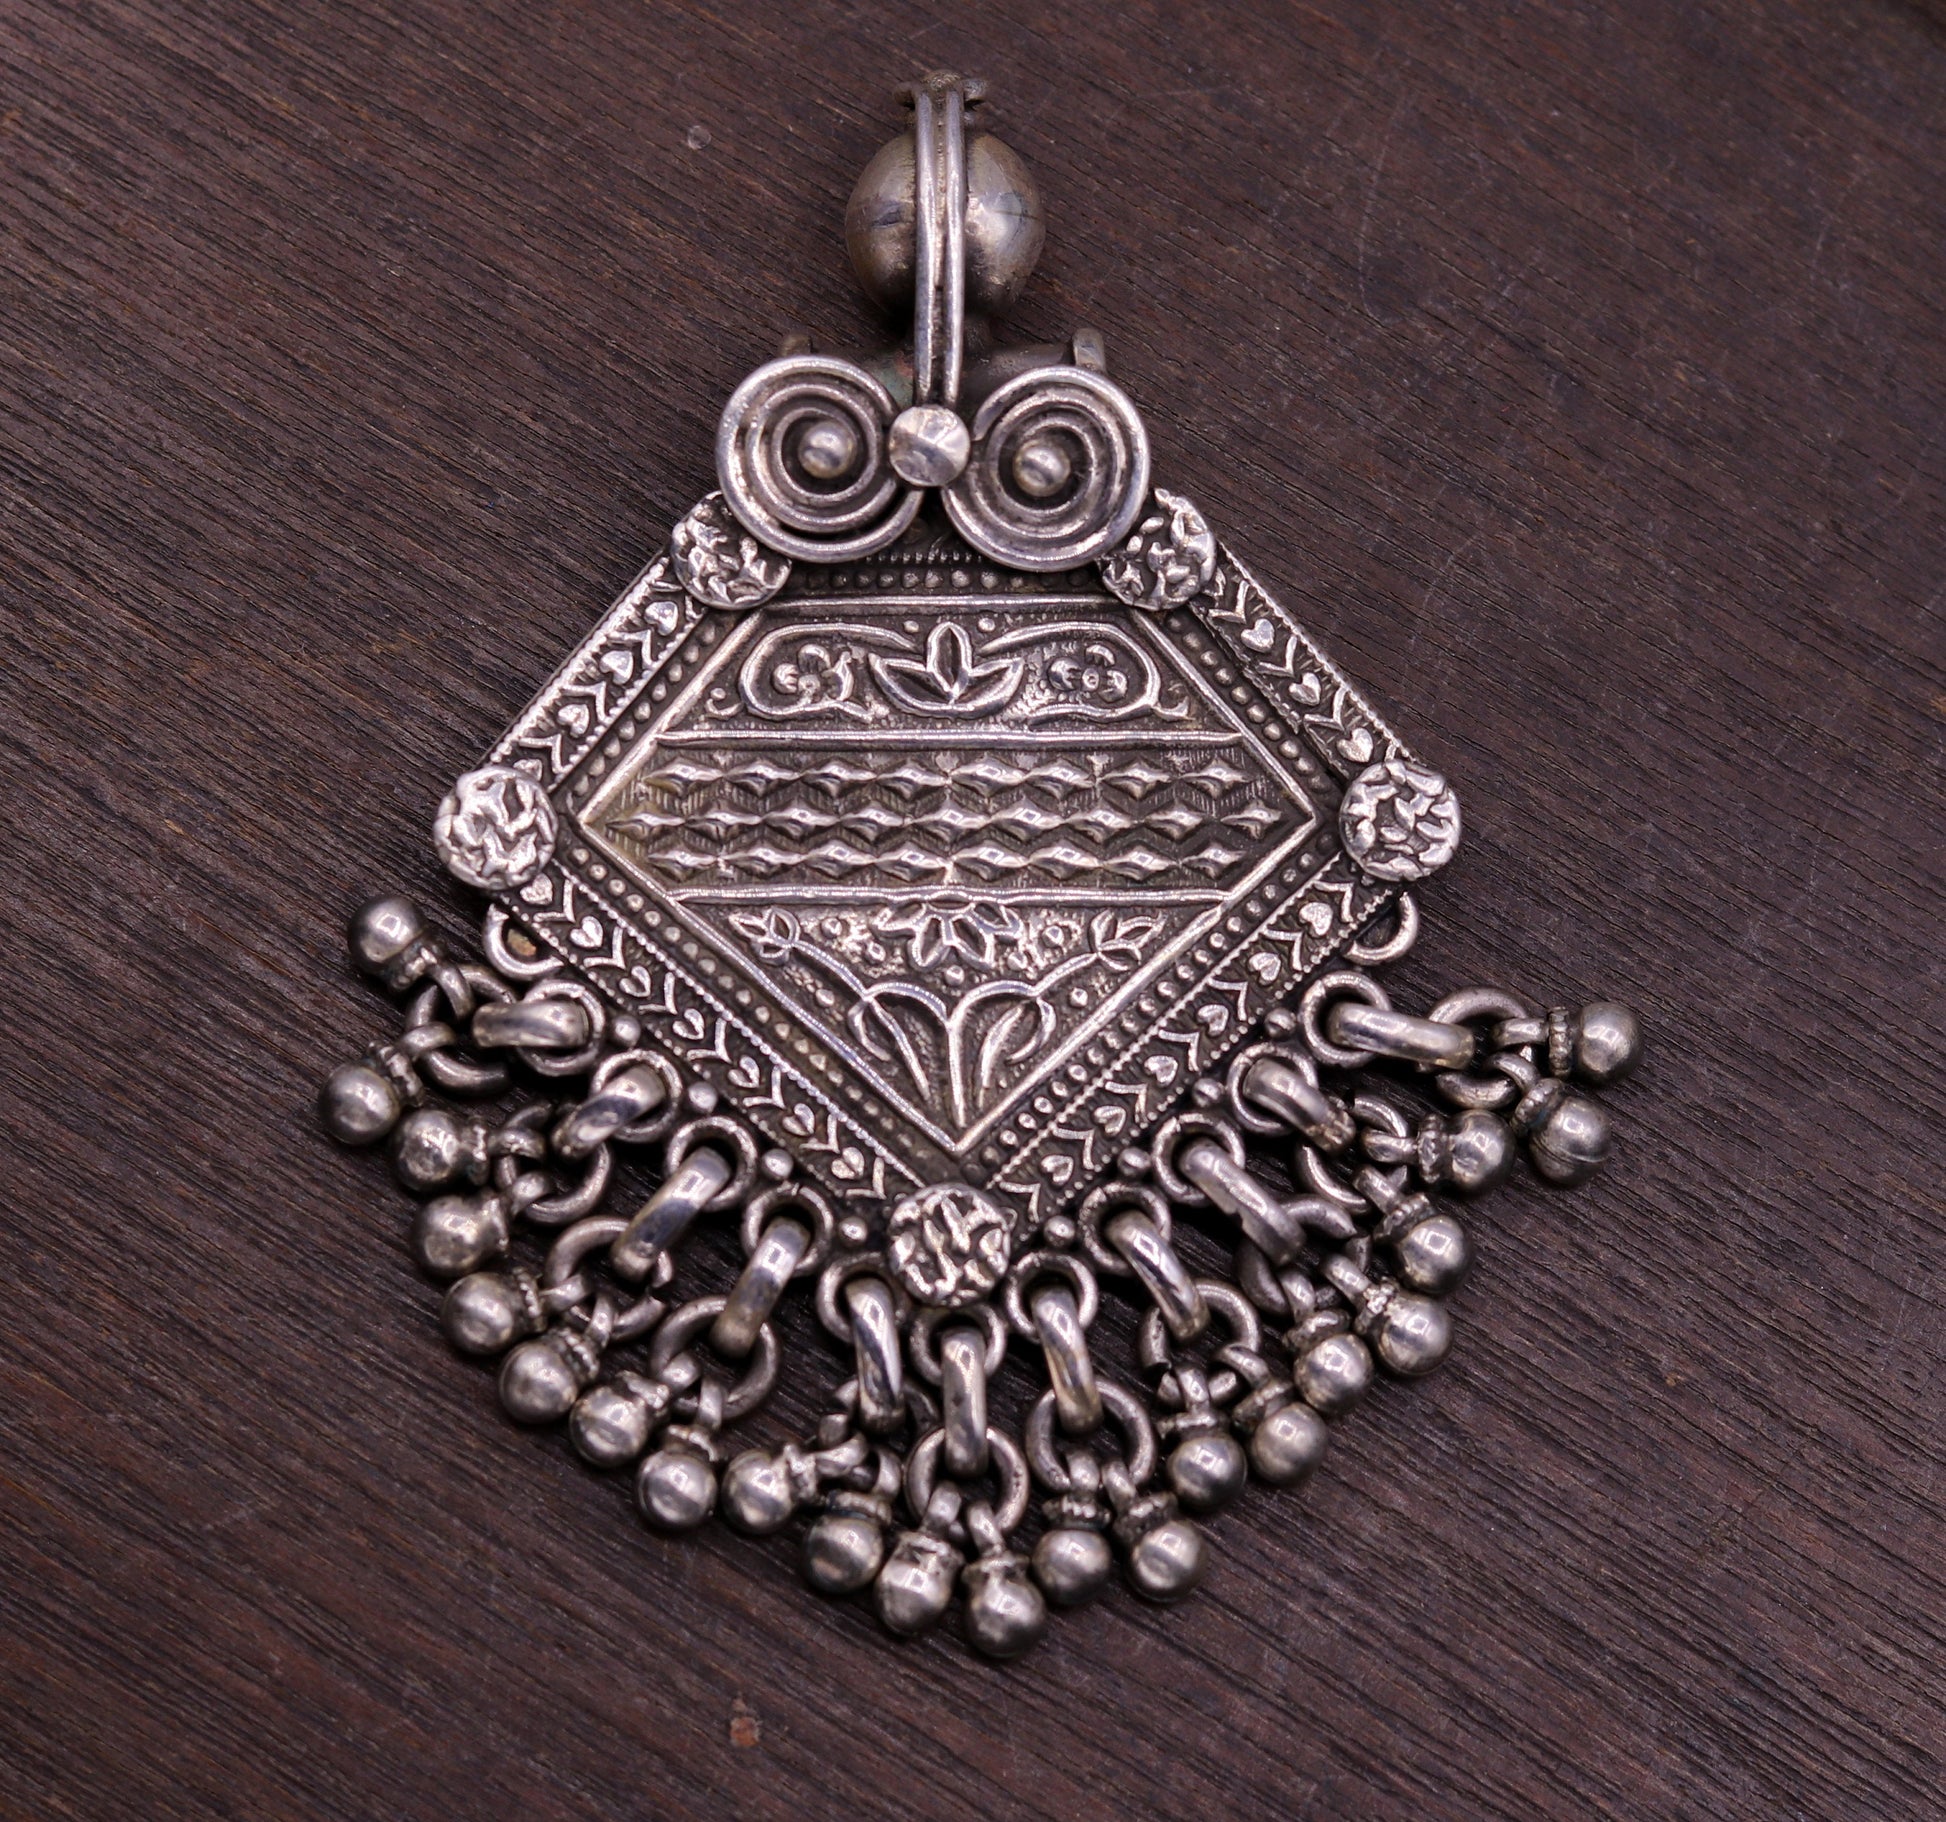 Vintage antique design Handmade 925 sterling silver excellent tribal pendant with hanging bells gifting women's jewelry nsp257 - TRIBAL ORNAMENTS